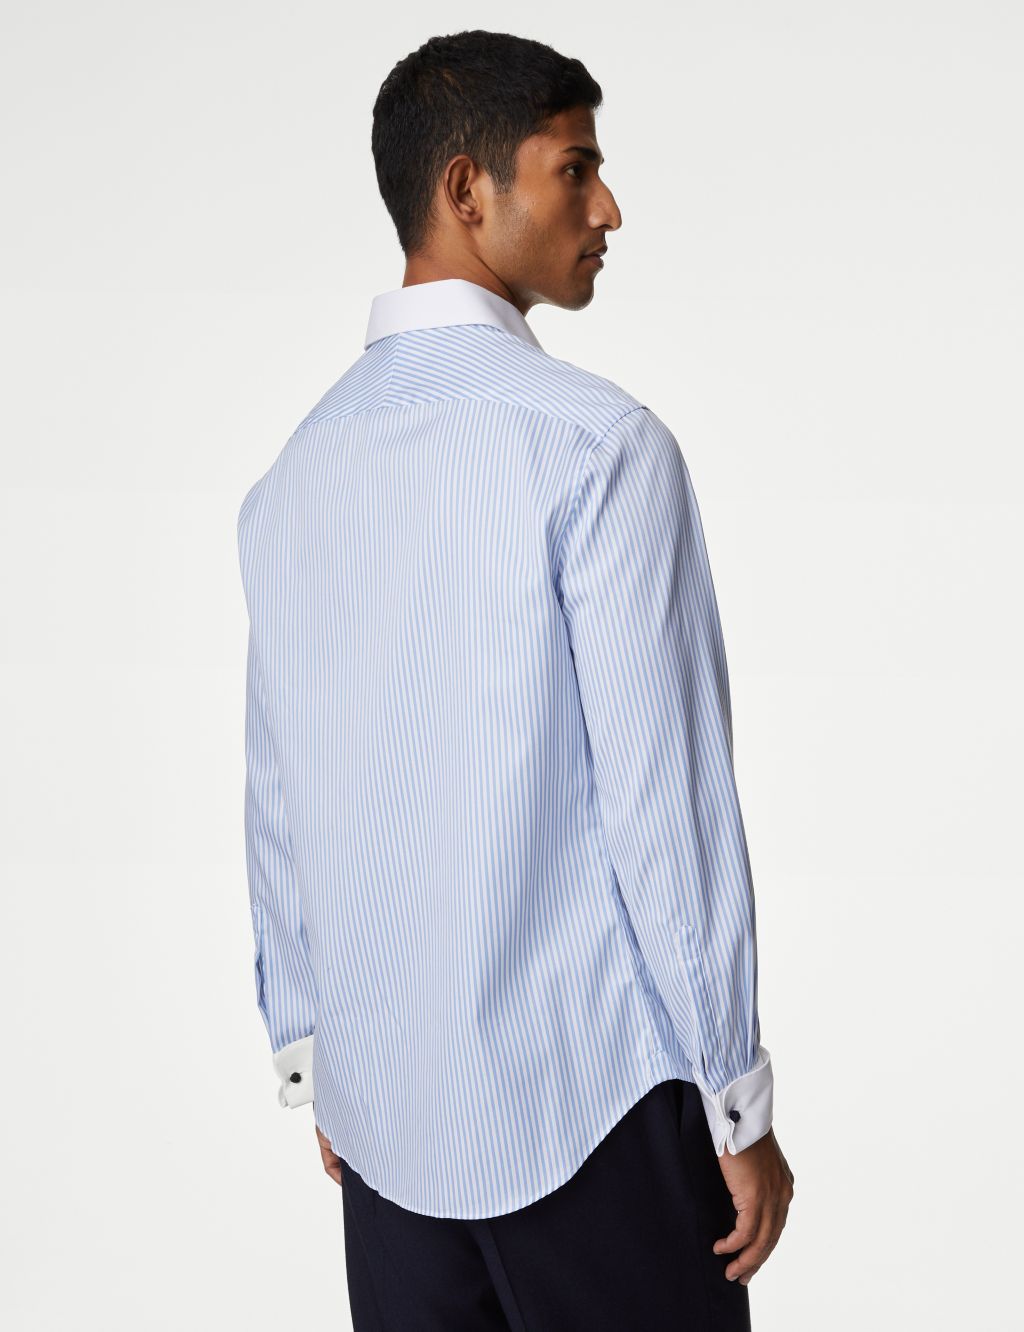 Tailored Fit Pure Cotton Striped Shirt image 4